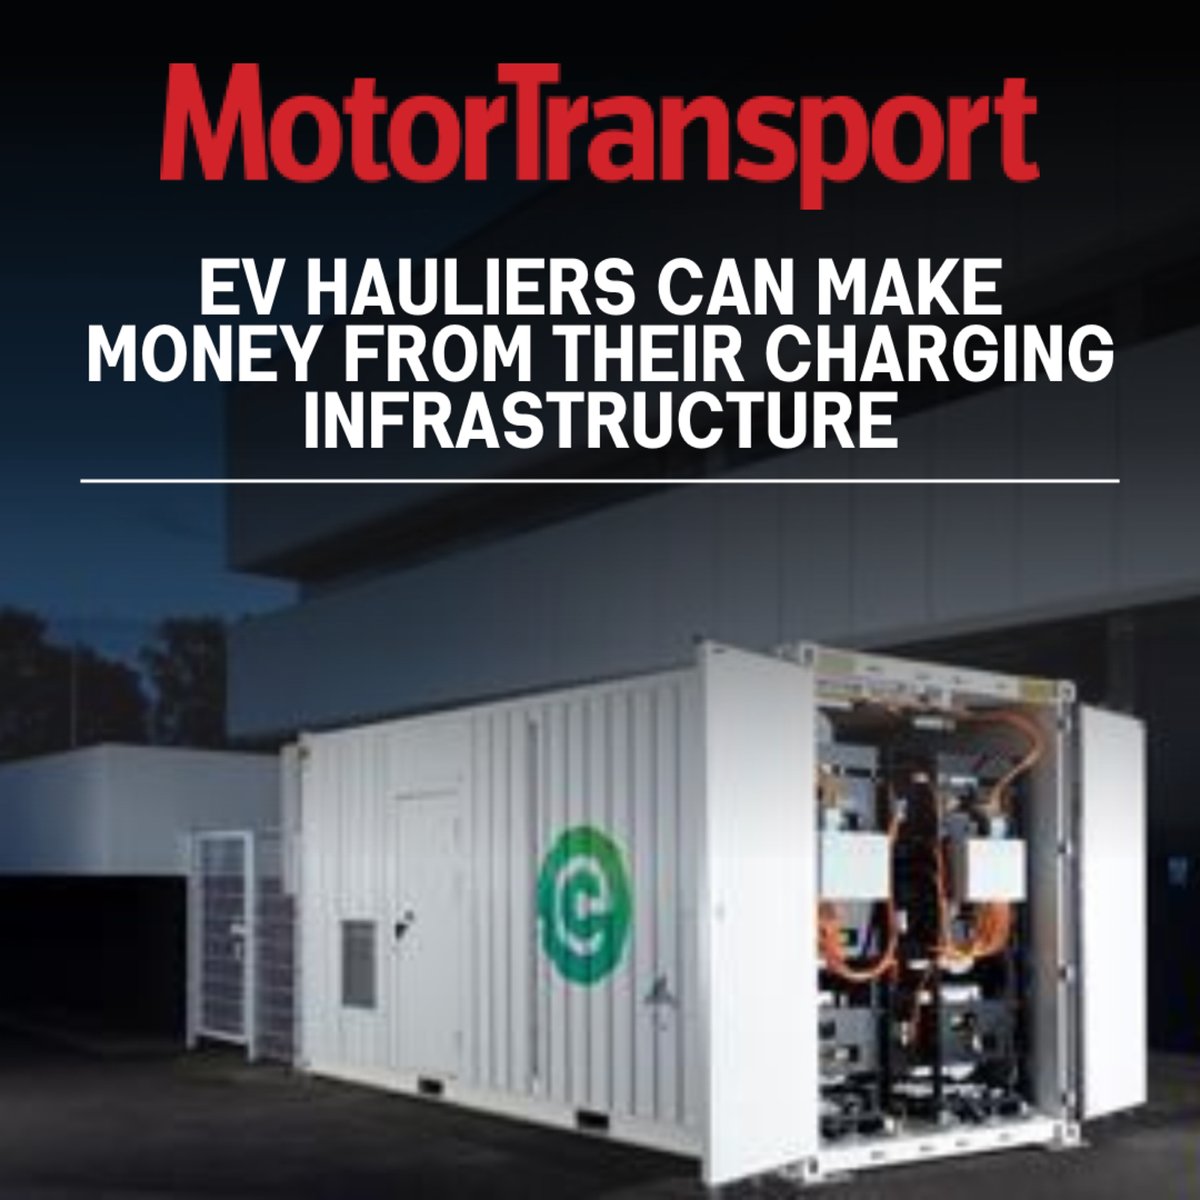 HGV operators could earn thousands of pounds a year by using their charging infrastructure as a revenue source, an energy storage firm has claimed. 🔗 bit.ly/3U5sjOL #motortransport